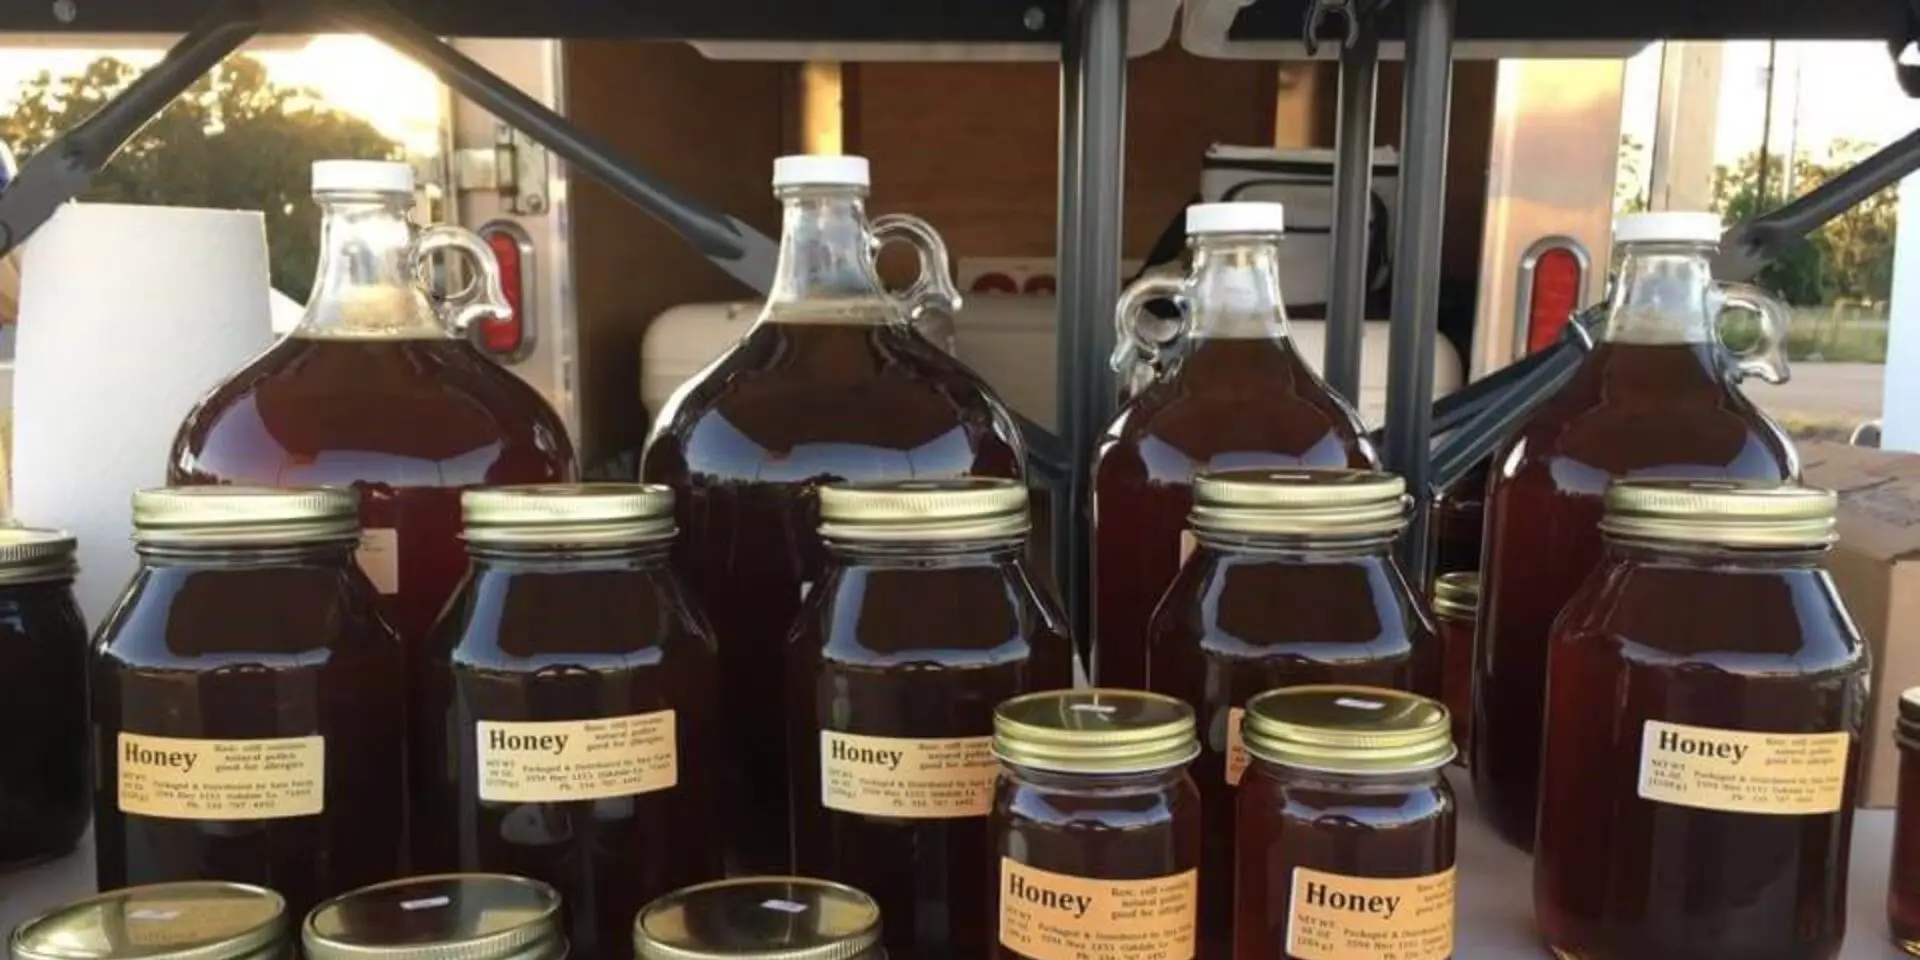 Honey in the containers in different sizes